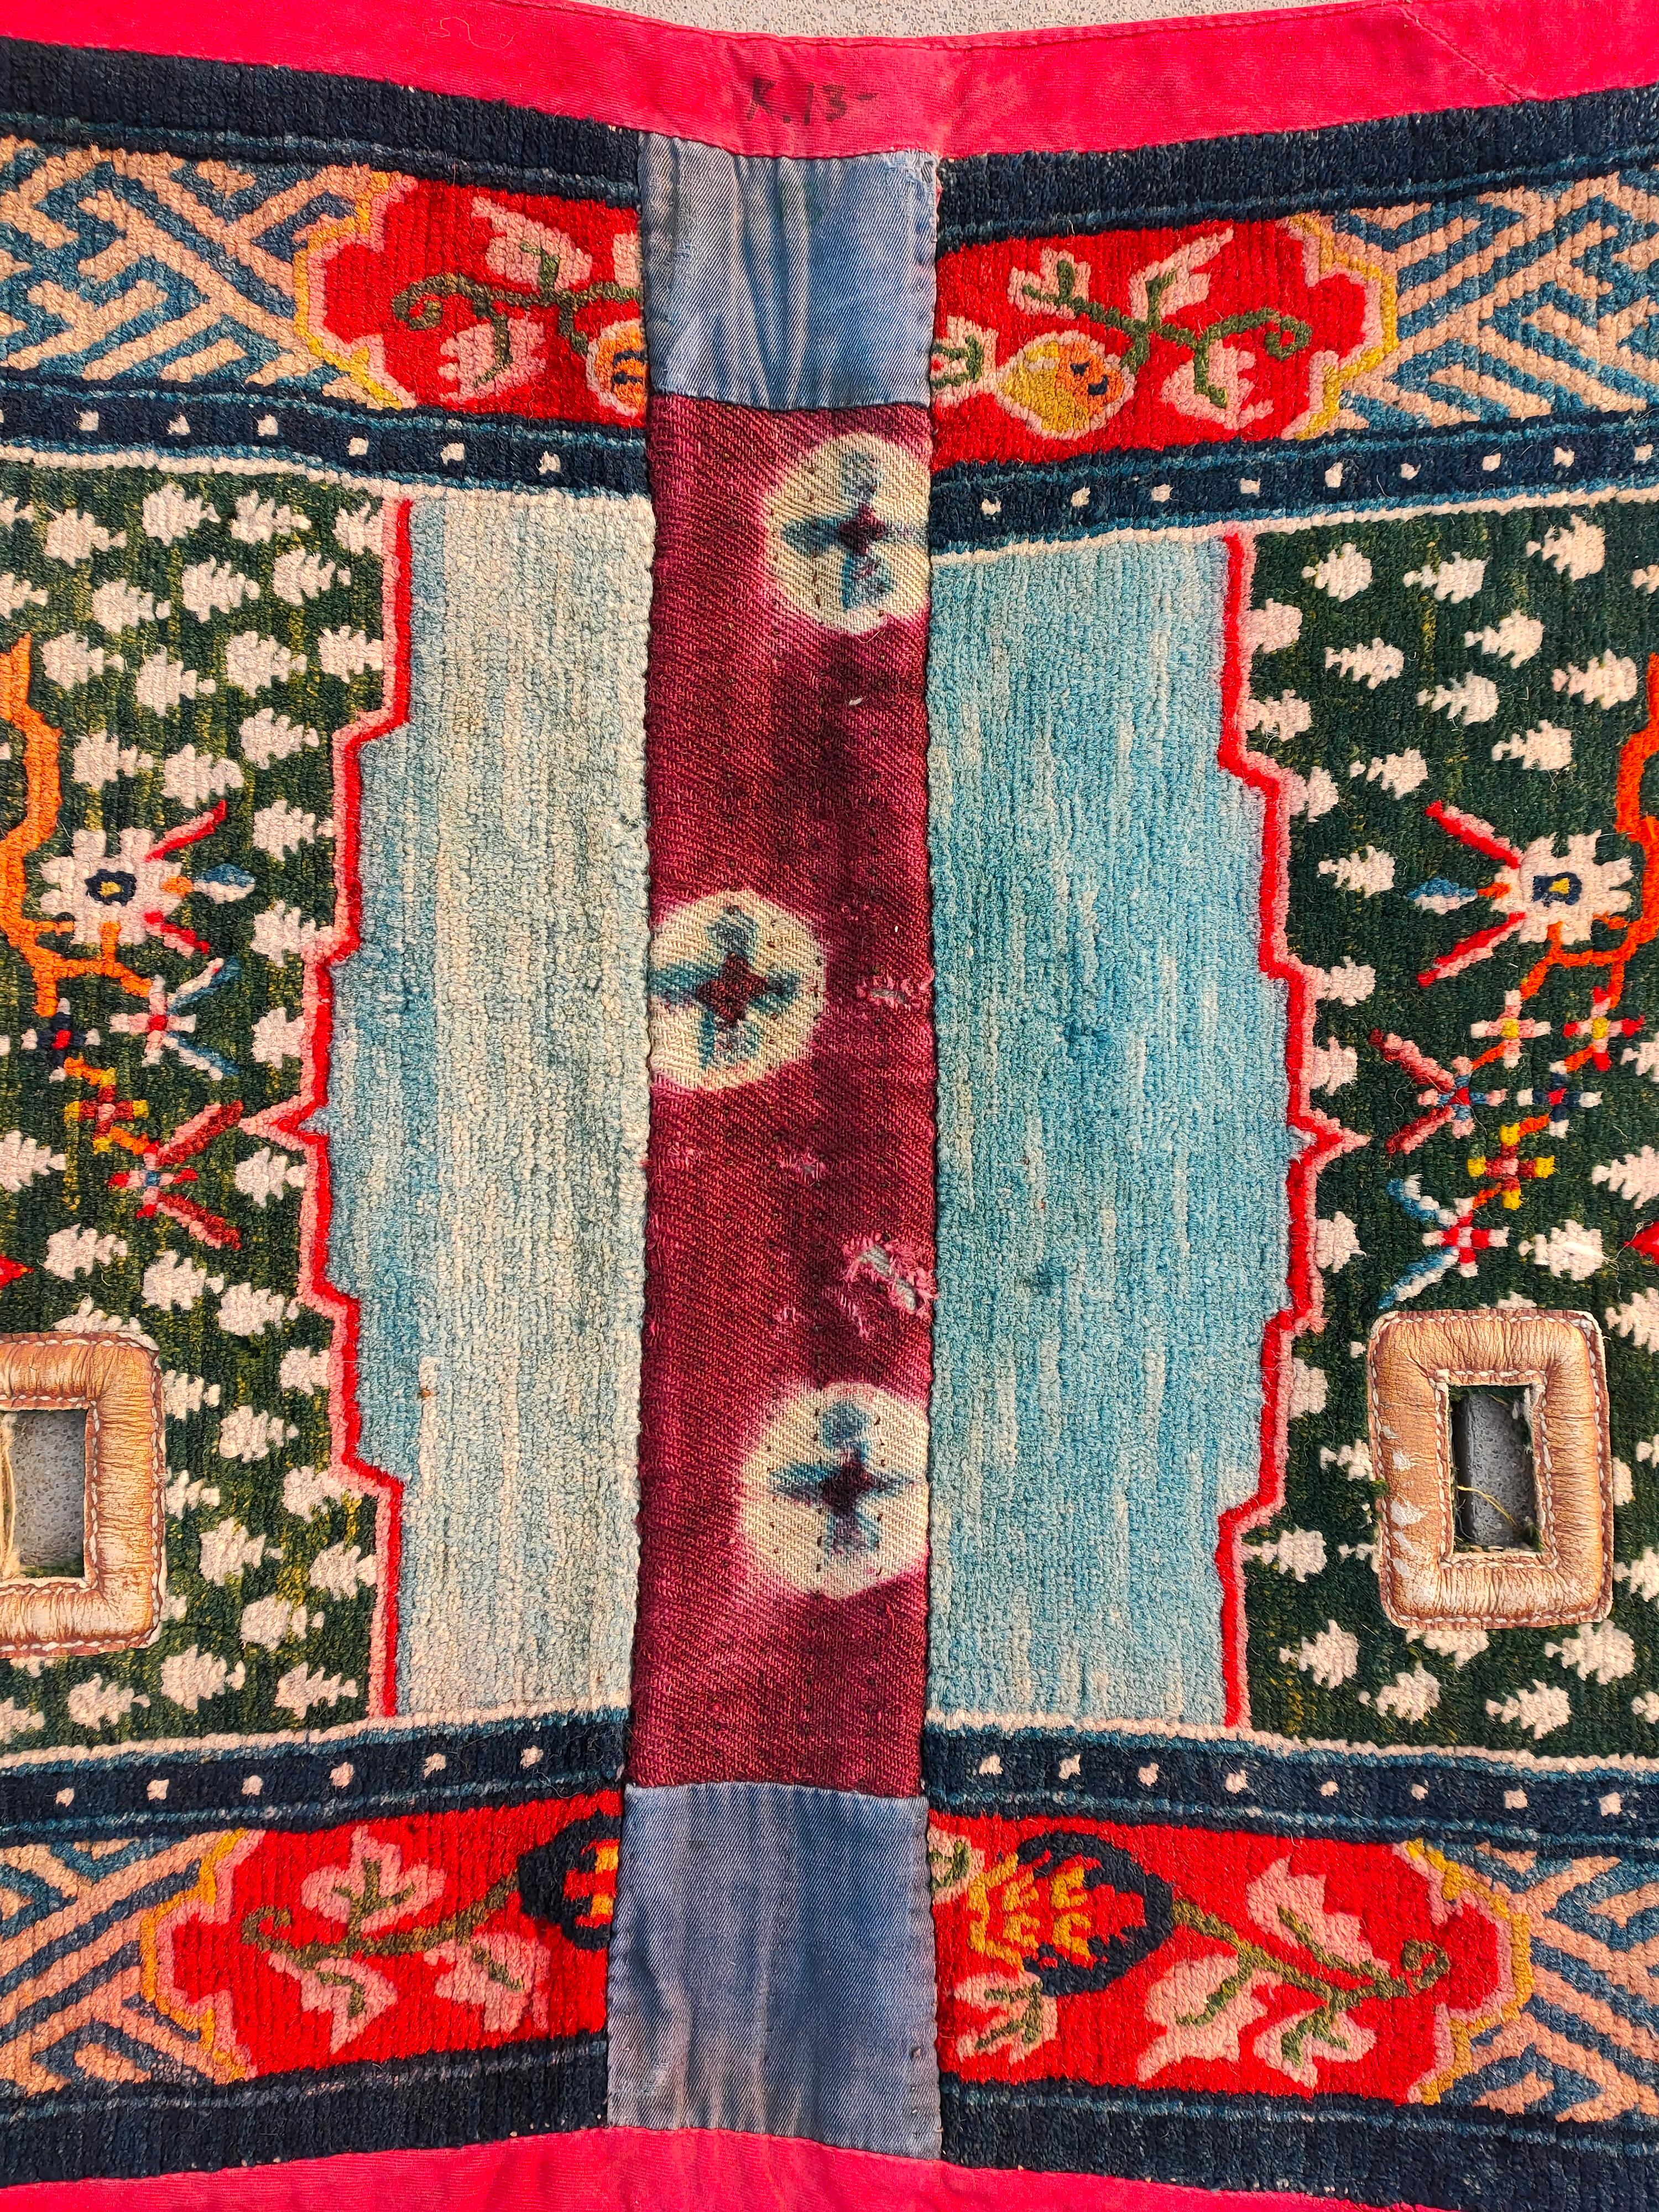 Early 20th Century Chinese Tibetan Saddle Cover ( 2'3